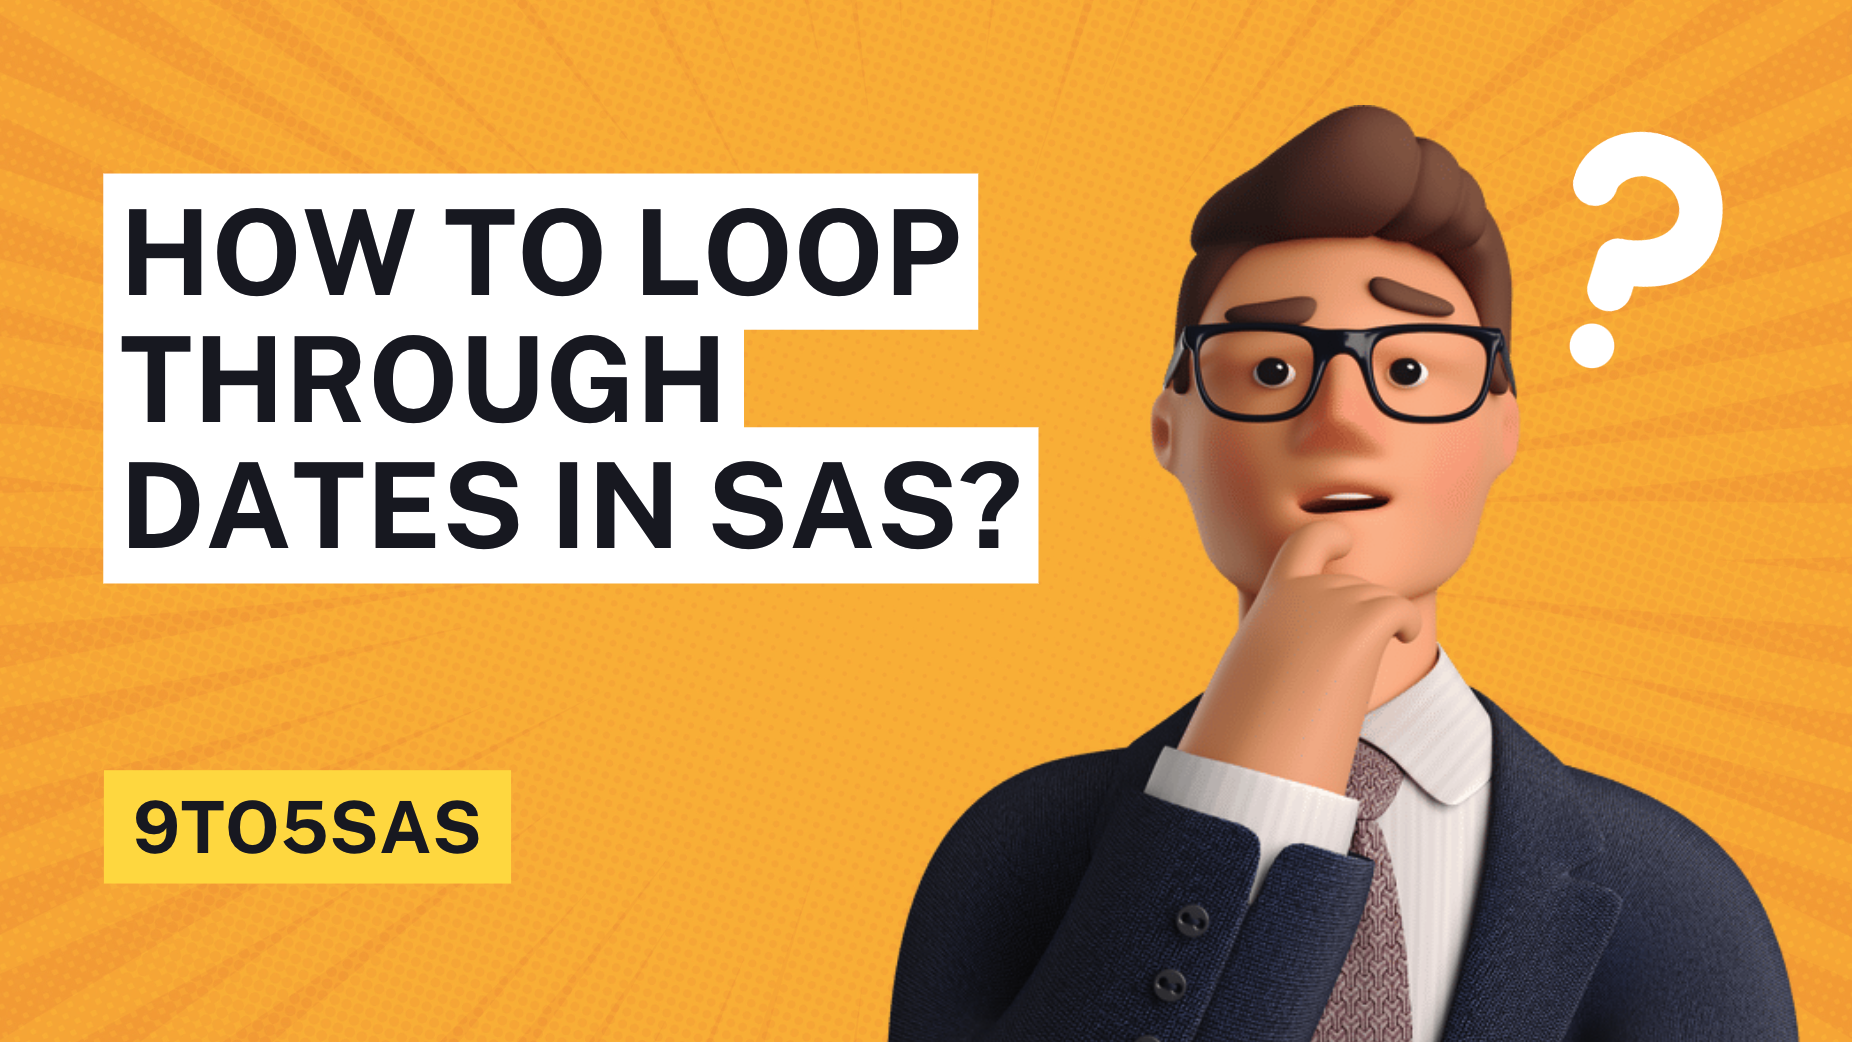 How to Loop through Dates in SAS?